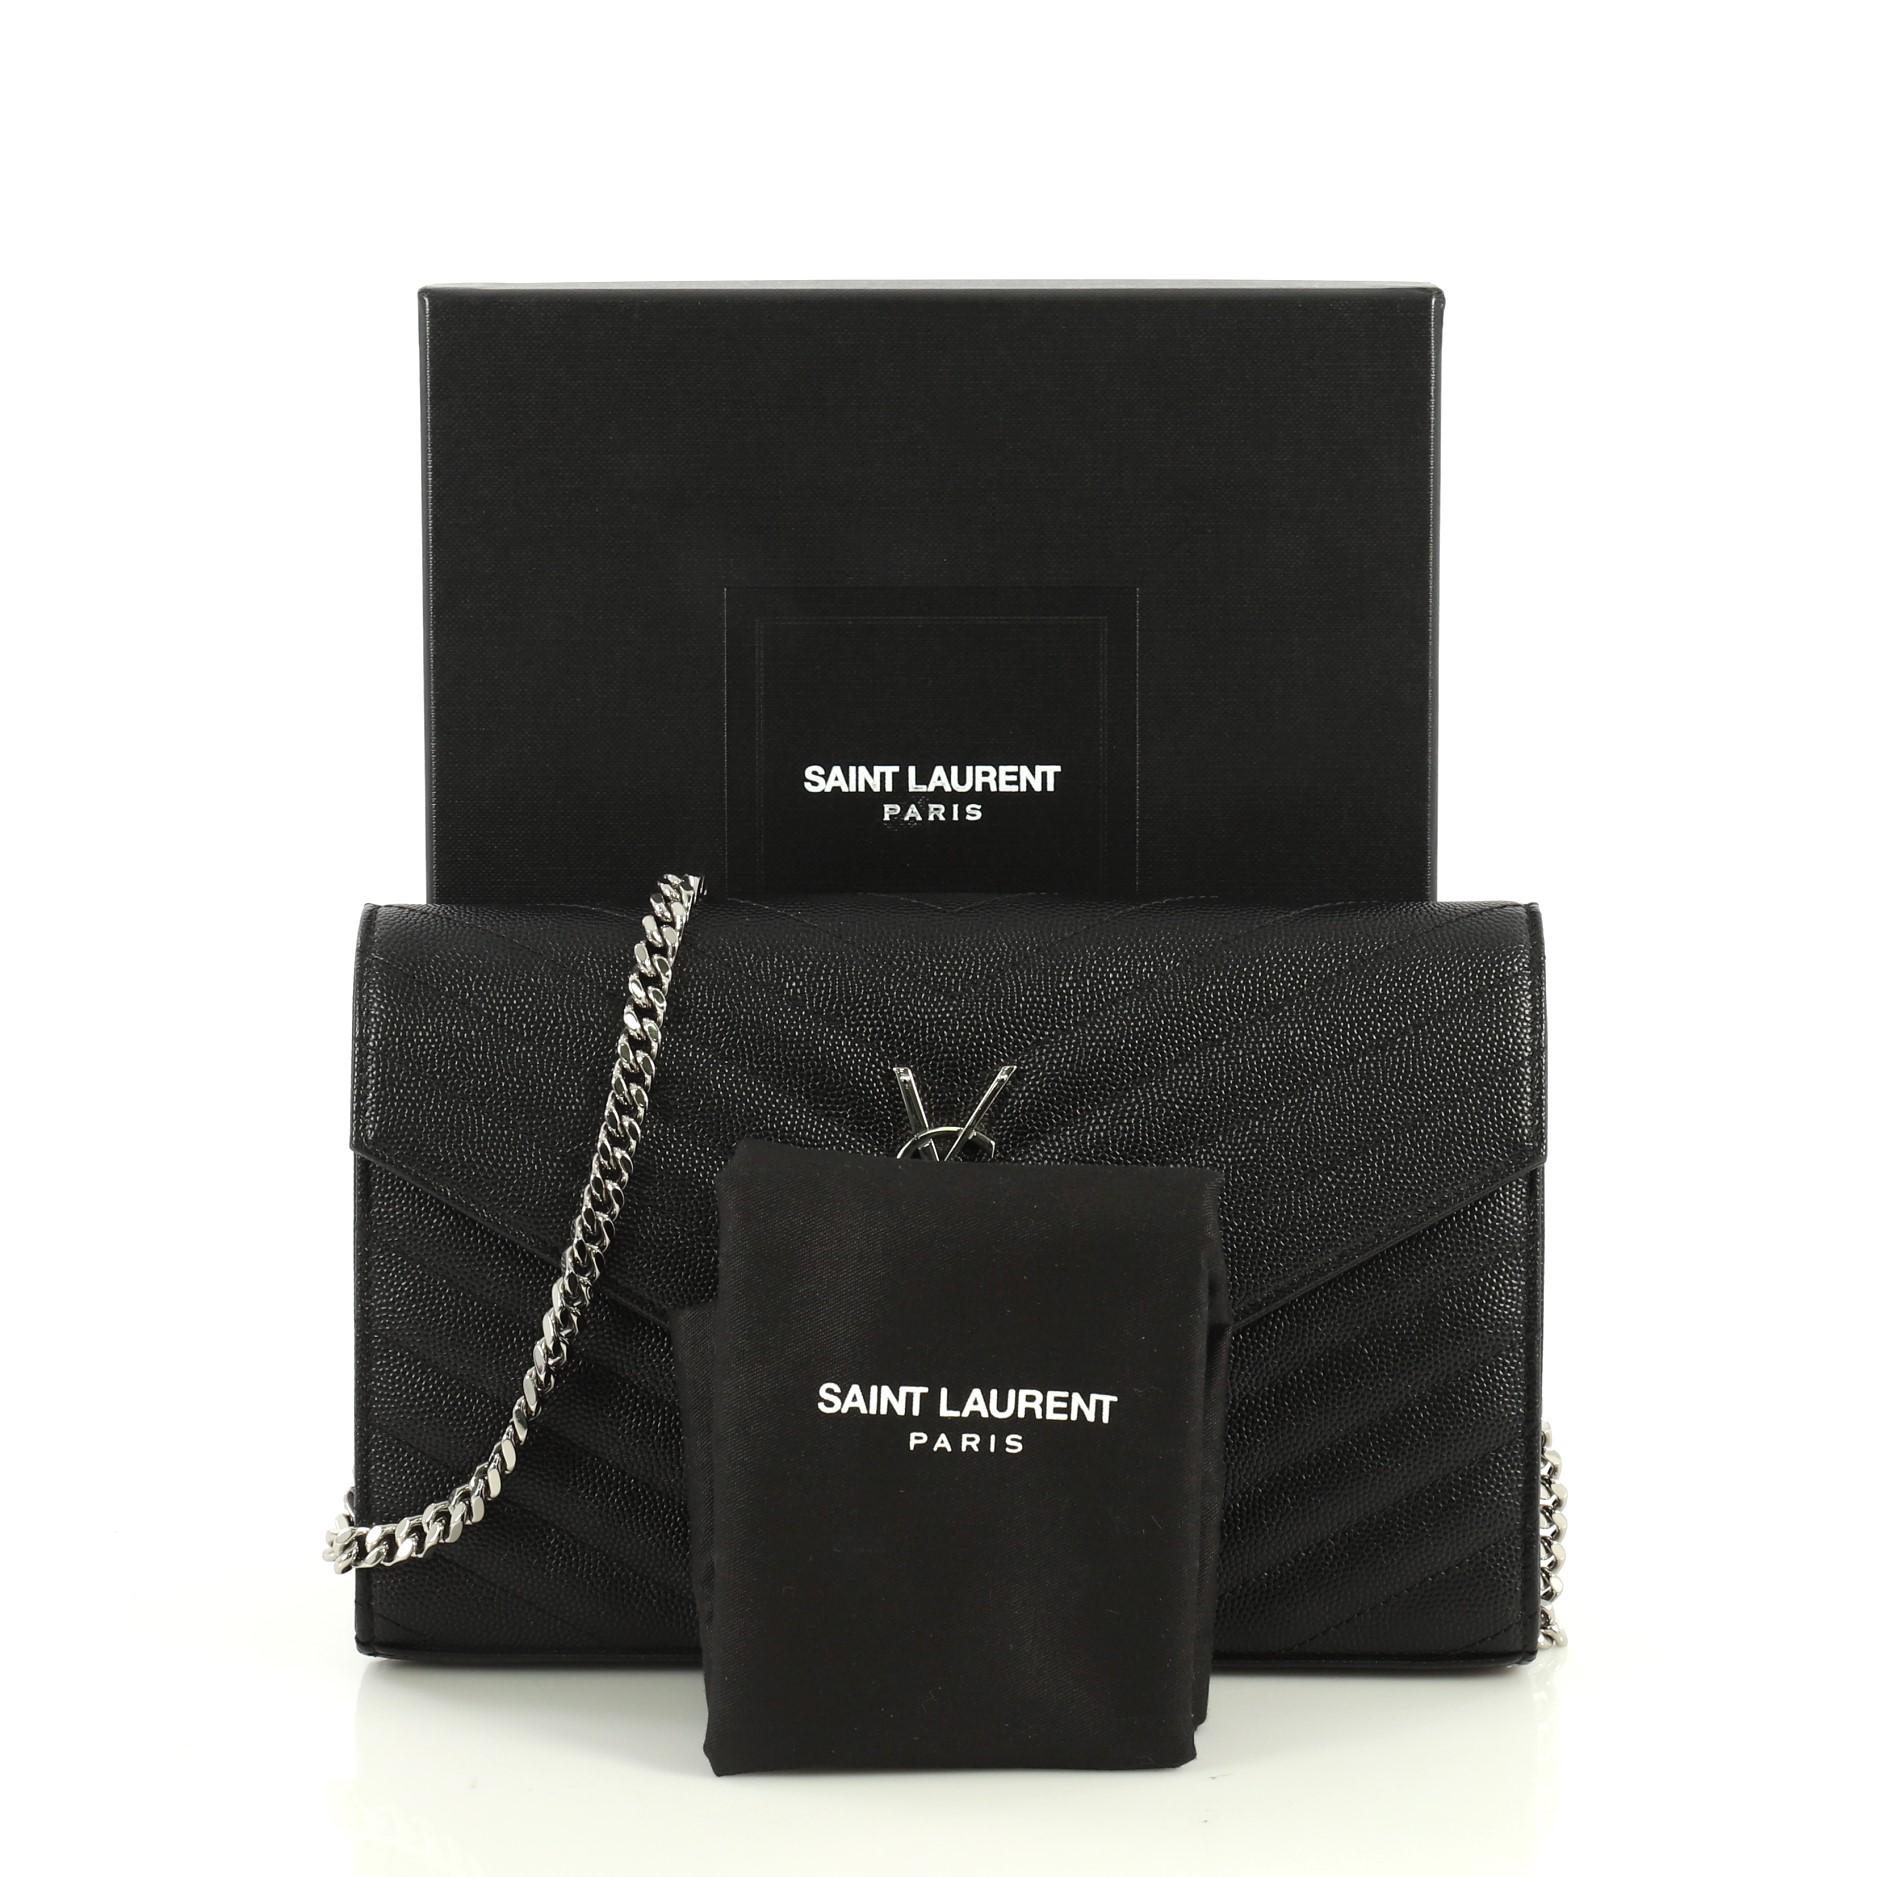 This Saint Laurent Classic Monogram Wallet on Chain Matelasse Chevron Leather Medium, crafted from black matelasse chevron leather, features chain link strap, YSL monogram logo at the front, and silver-tone hardware. Its magnetic snap closure opens